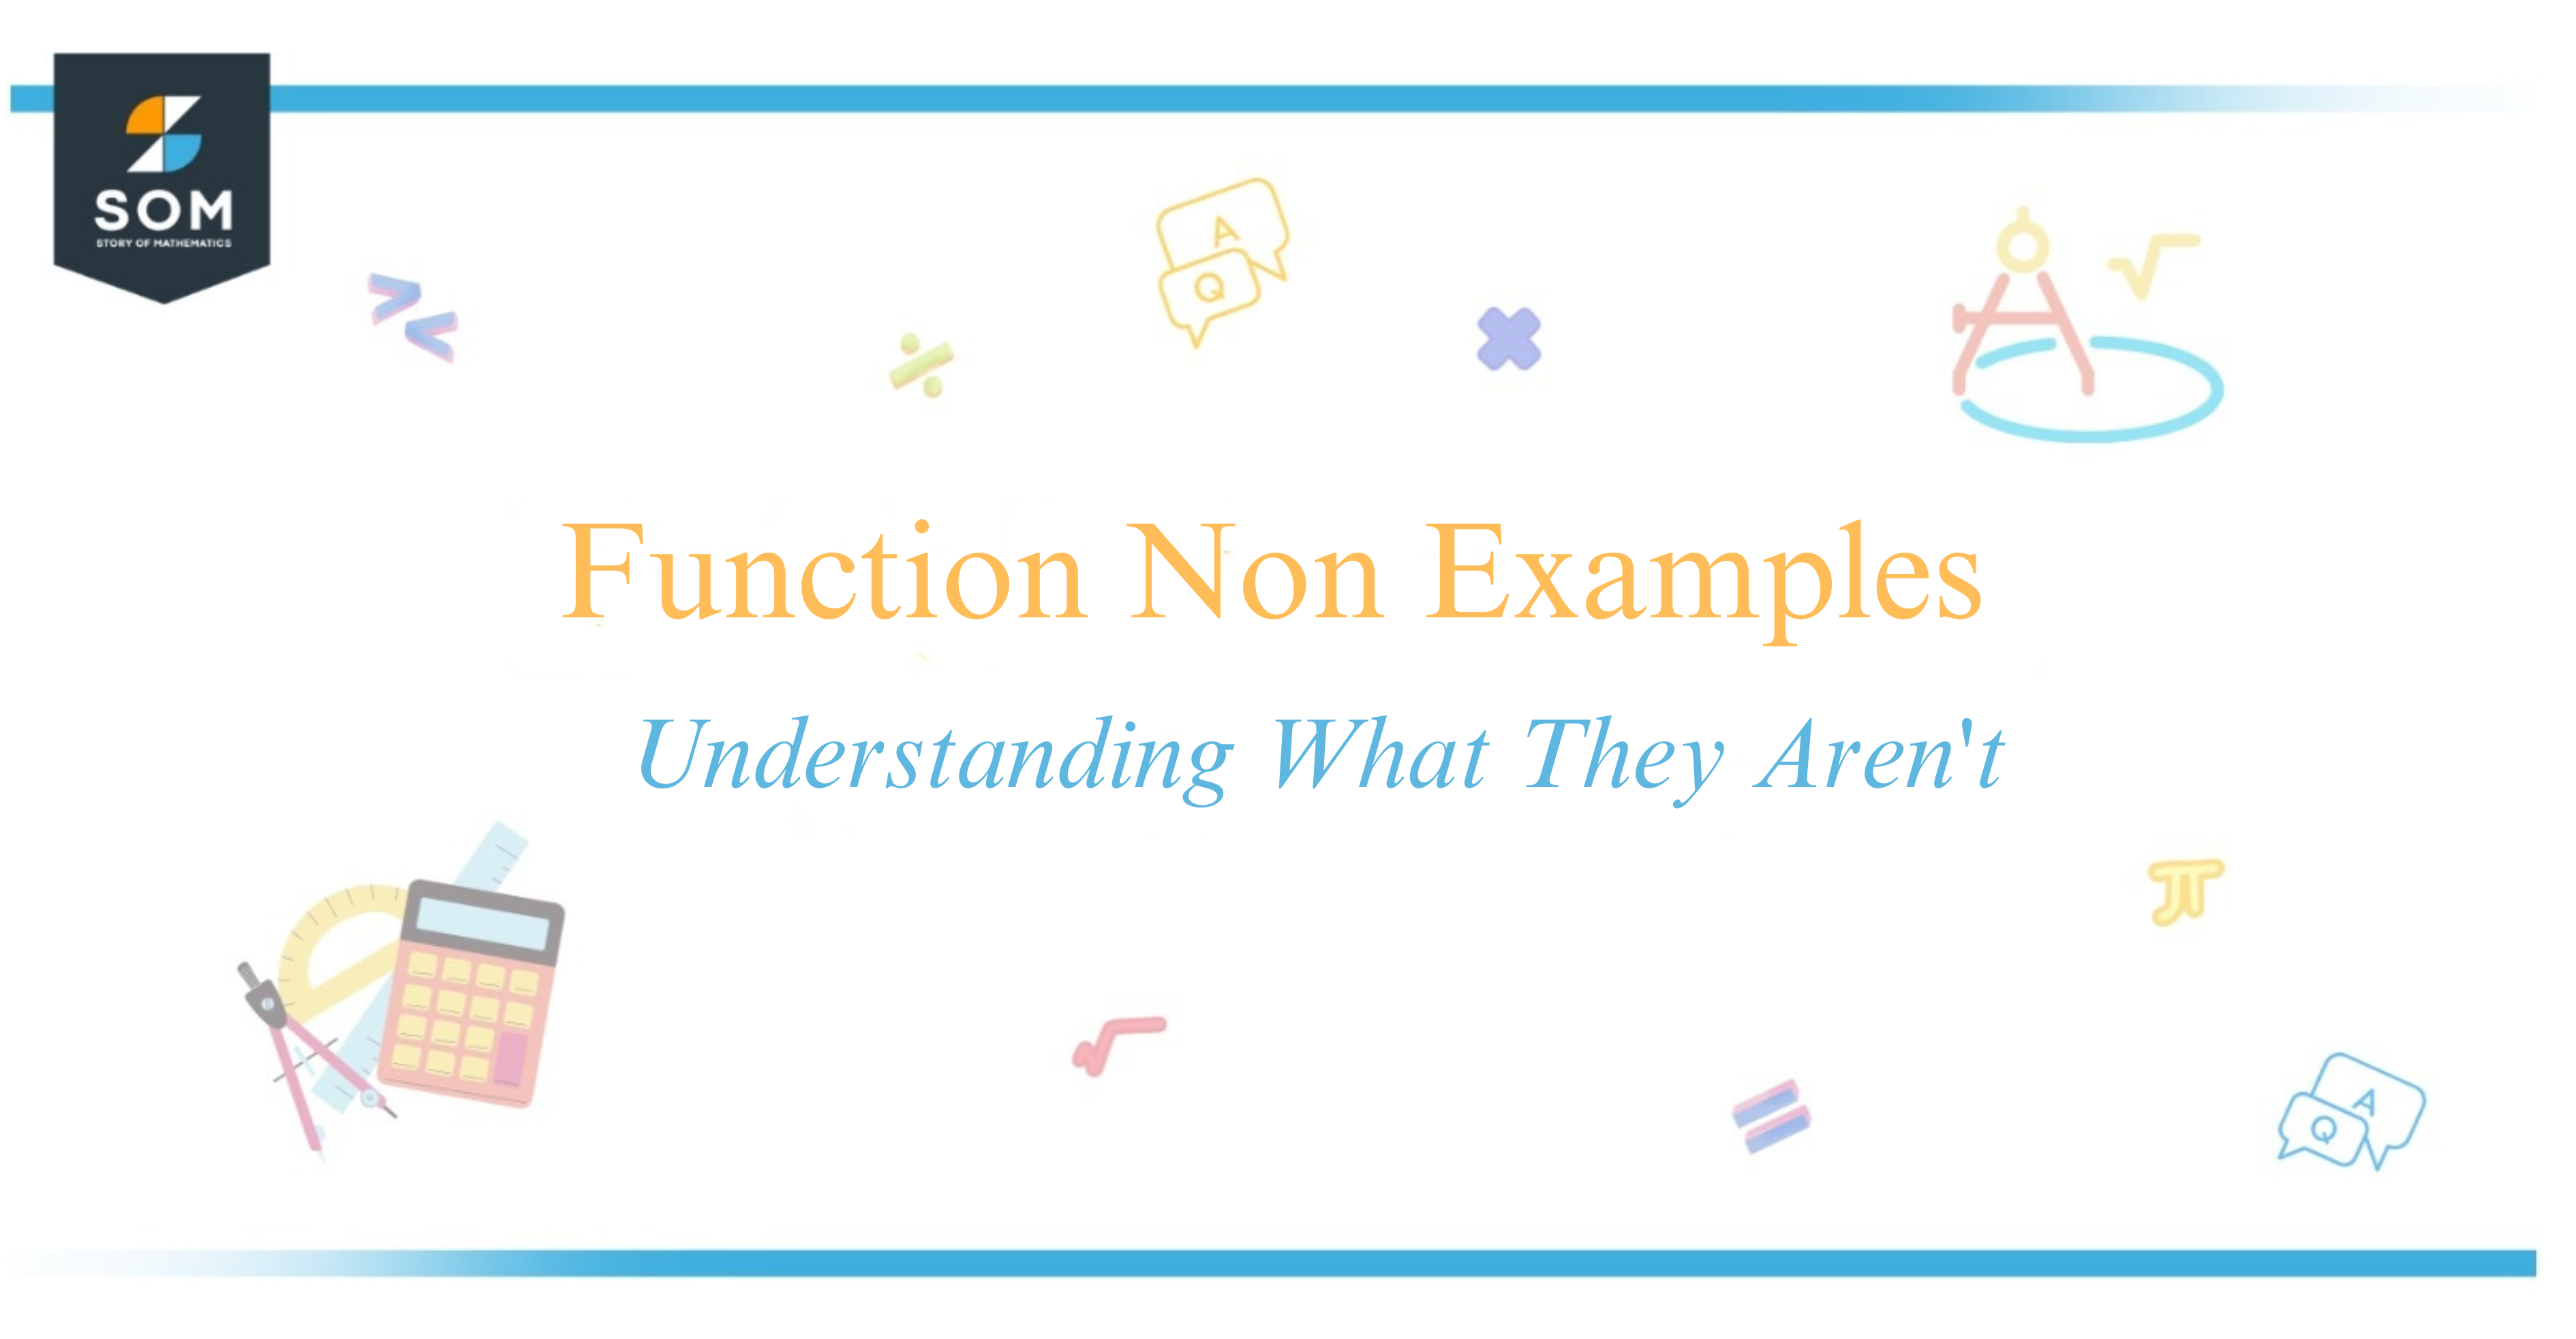 Function Non Examples Understanding What They Aren't